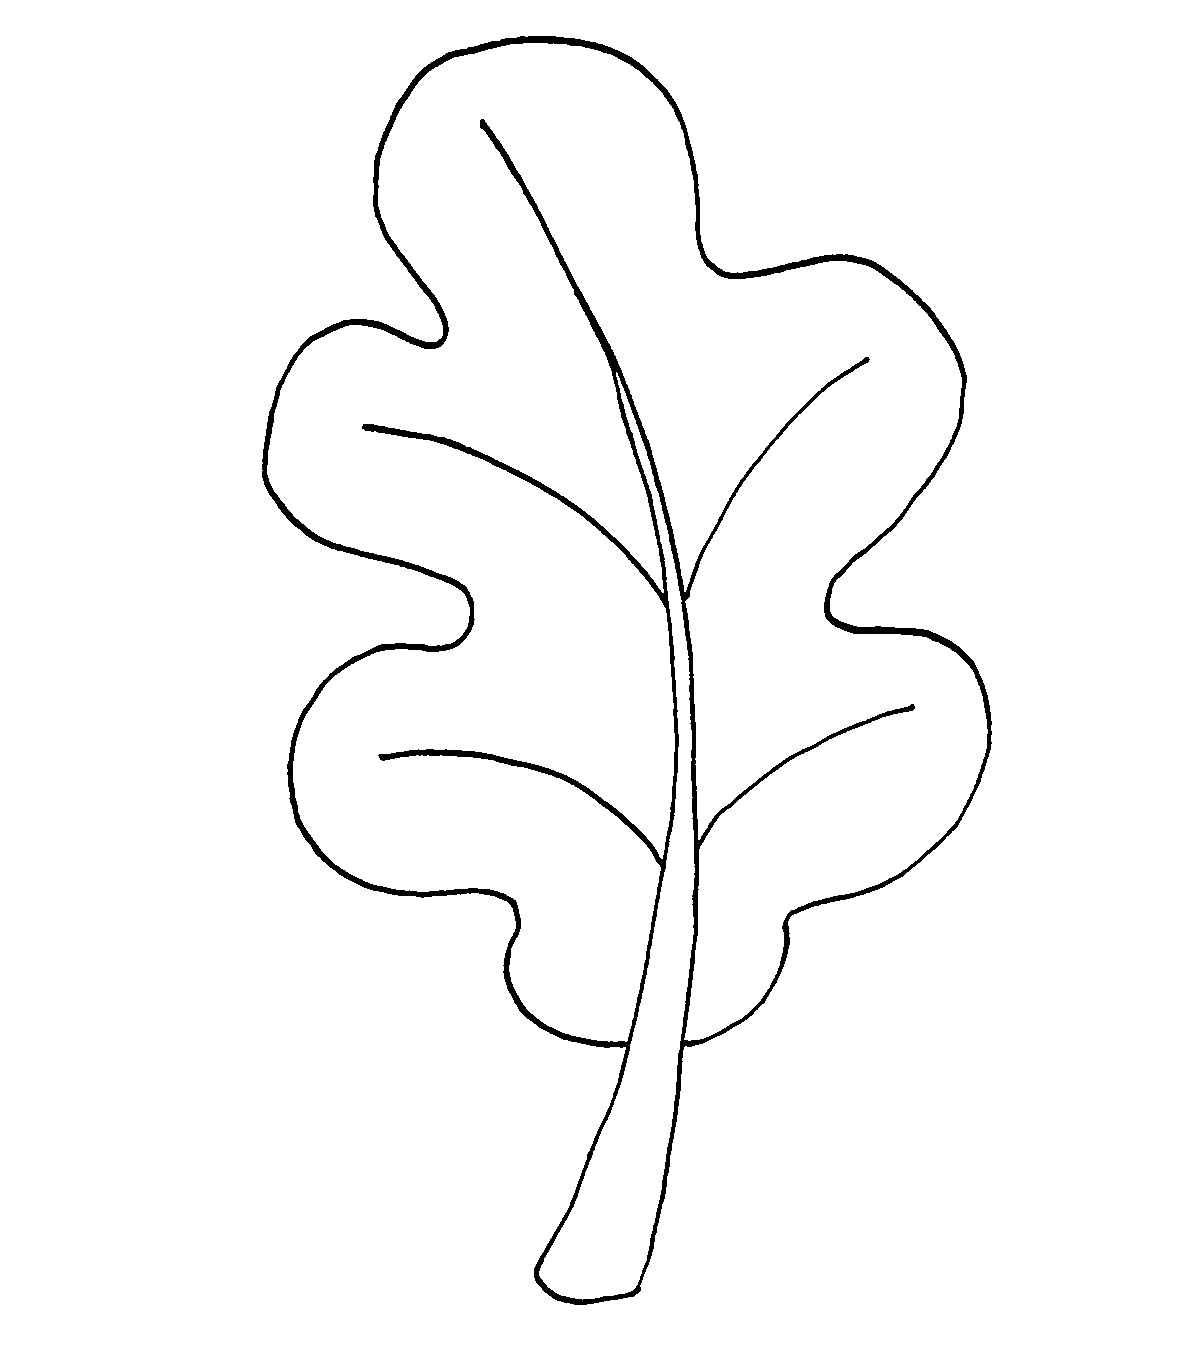 Top 20 Leaf Coloring Pages Your Toddler Will Love To Color